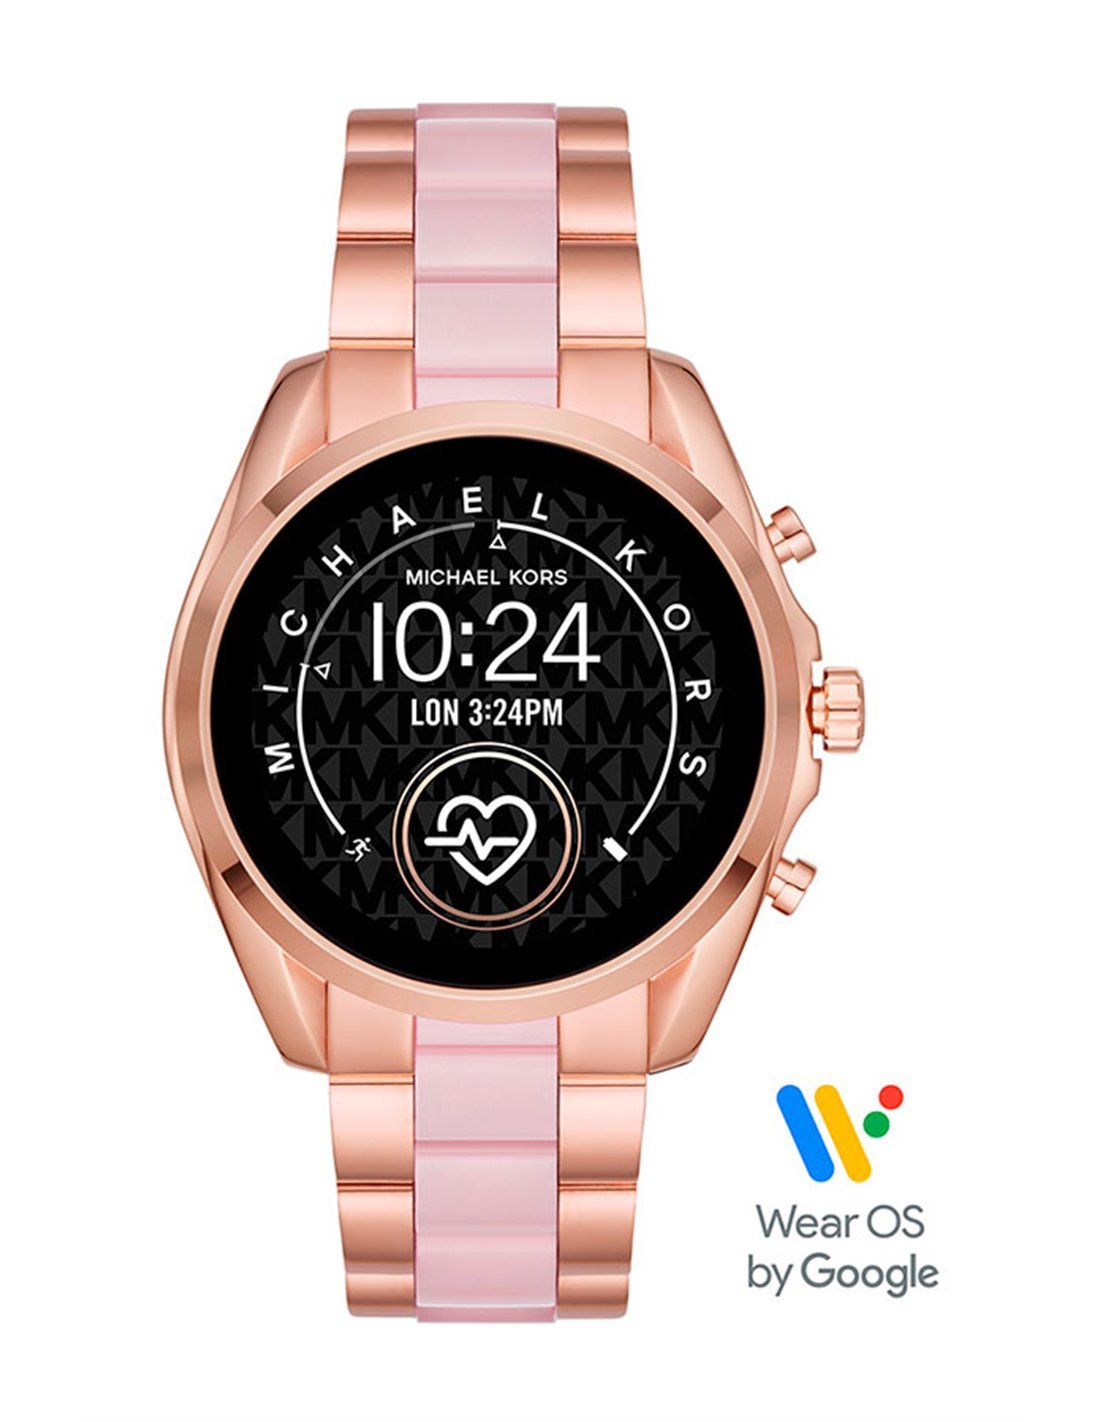 can i text on my michael kors smartwatch